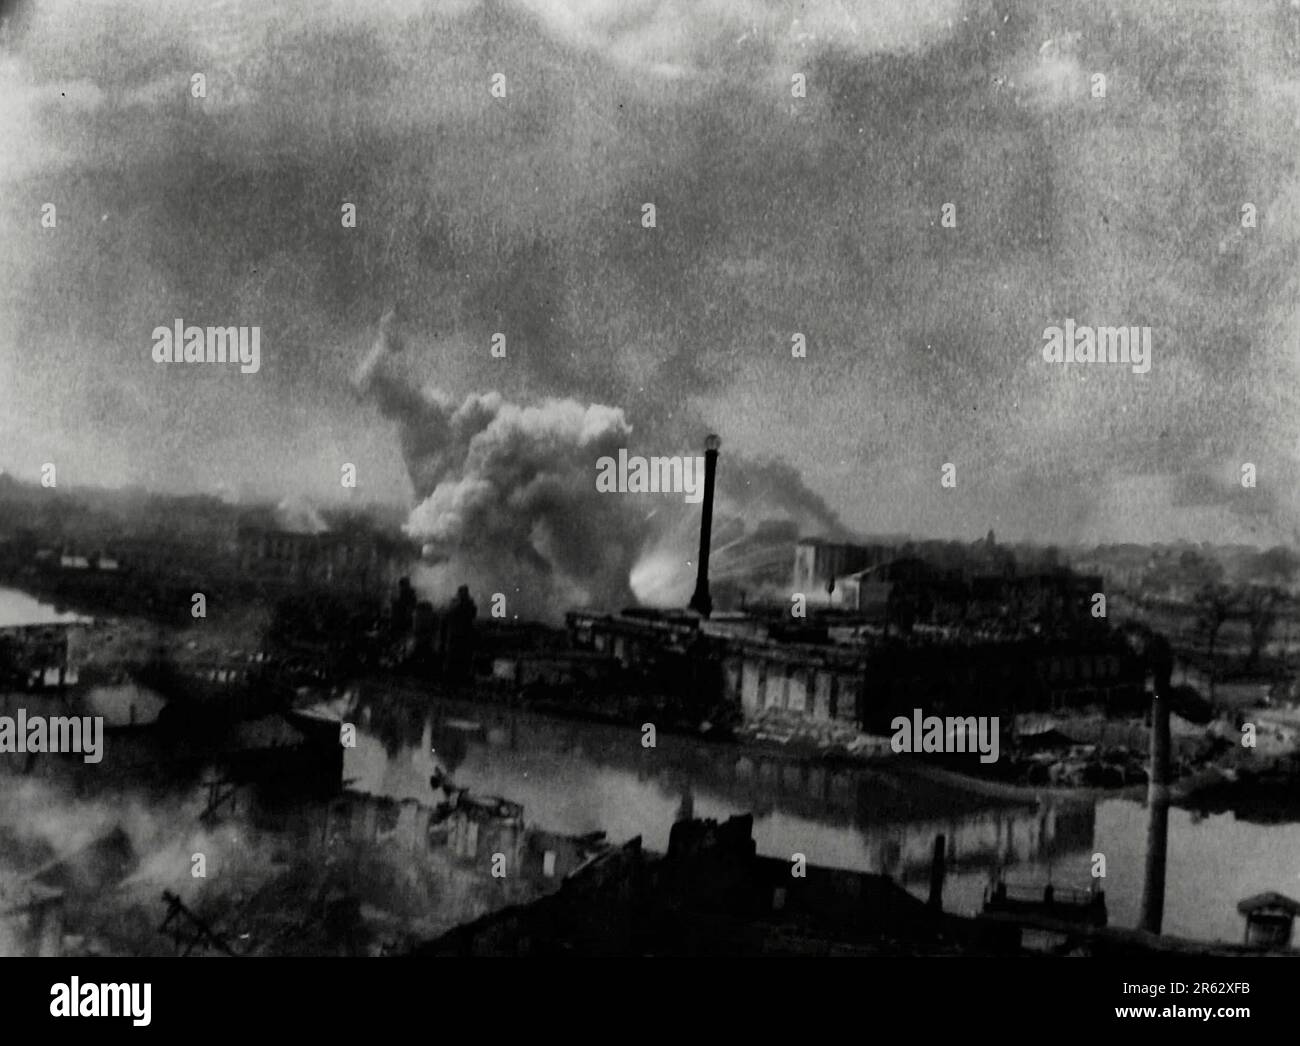 The walled city of Intramurros, built by the Spanish many years ago, will be the final battle ground in the battle of Manila, because it contains an untold number of Japanese soldiers who are prepared to fight to the bitter end. Here are the Metropolitan Theater and the ice house taking a terrific shelling from 155mm long guns, February 1945 Stock Photo